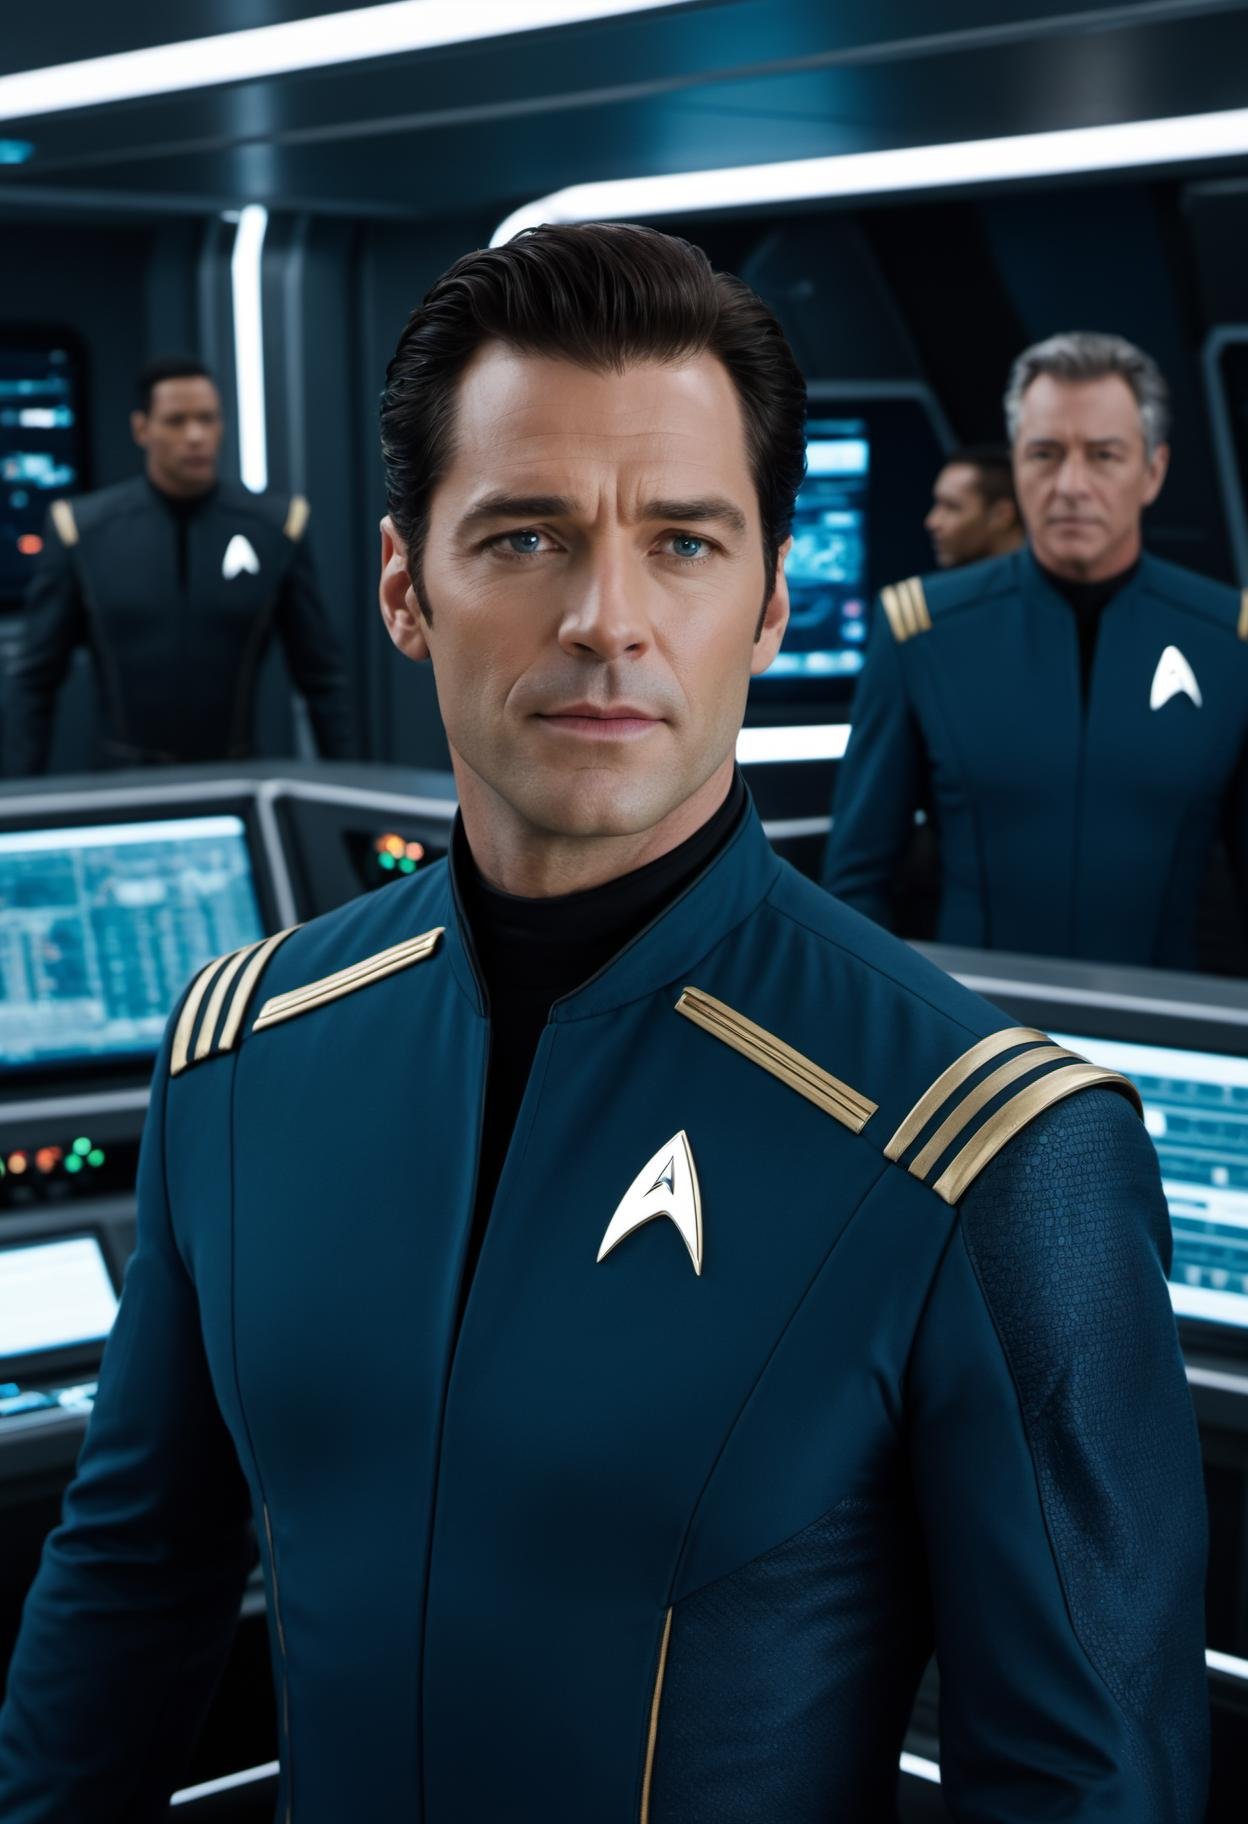 1man, a handsome starship captain, (Henry Cavill:0.7)|Hugh Jackman|Russell Crowe, well fitting futuristic space commander uniform, stubble, on the bridge of  an advanced space faring war ship, high tech computers,, crew in the background, very detailed cinematic film still from star trek next generation